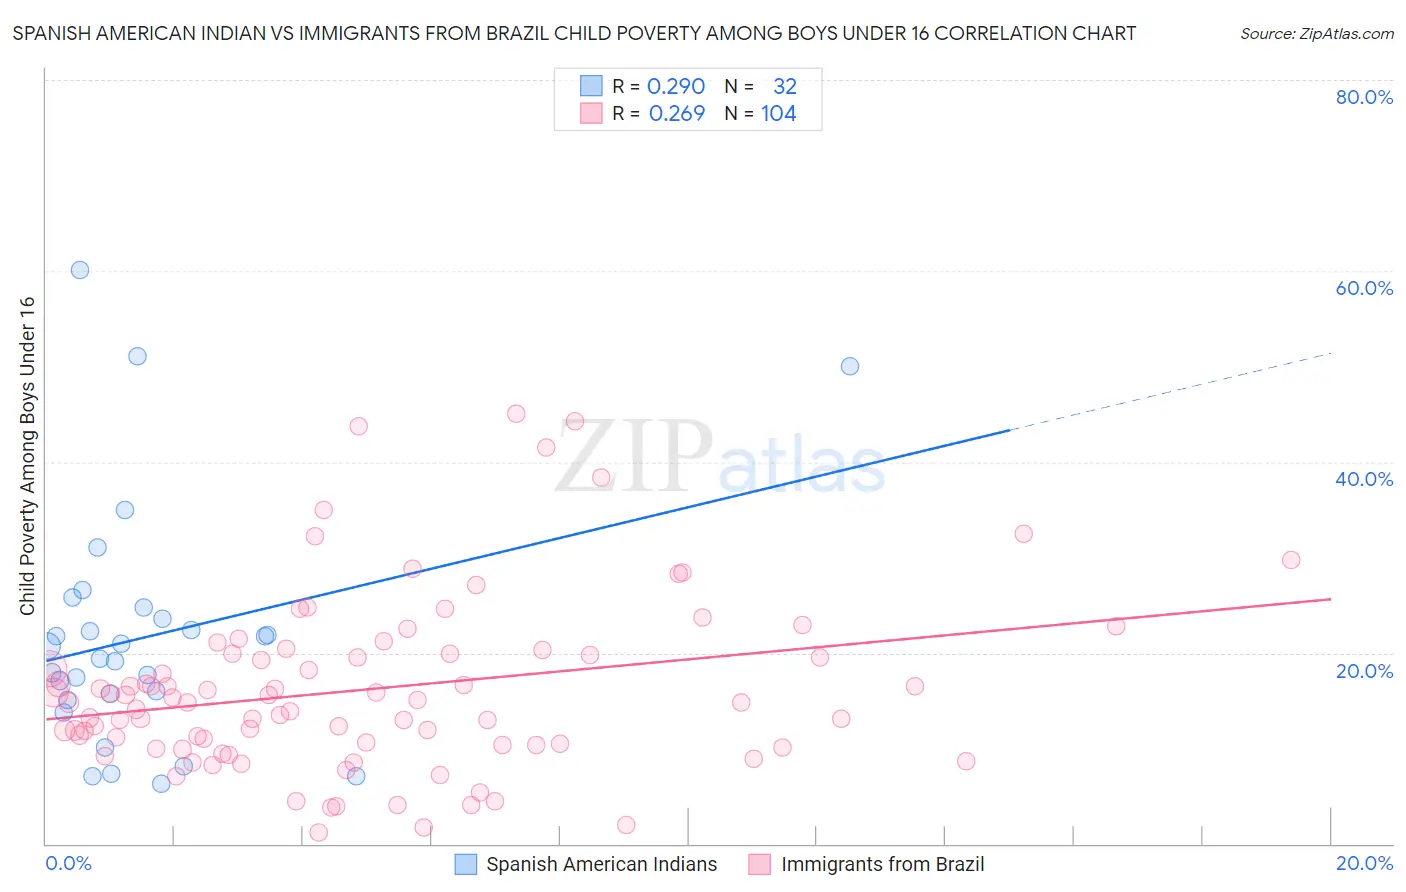 Spanish American Indian vs Immigrants from Brazil Child Poverty Among Boys Under 16